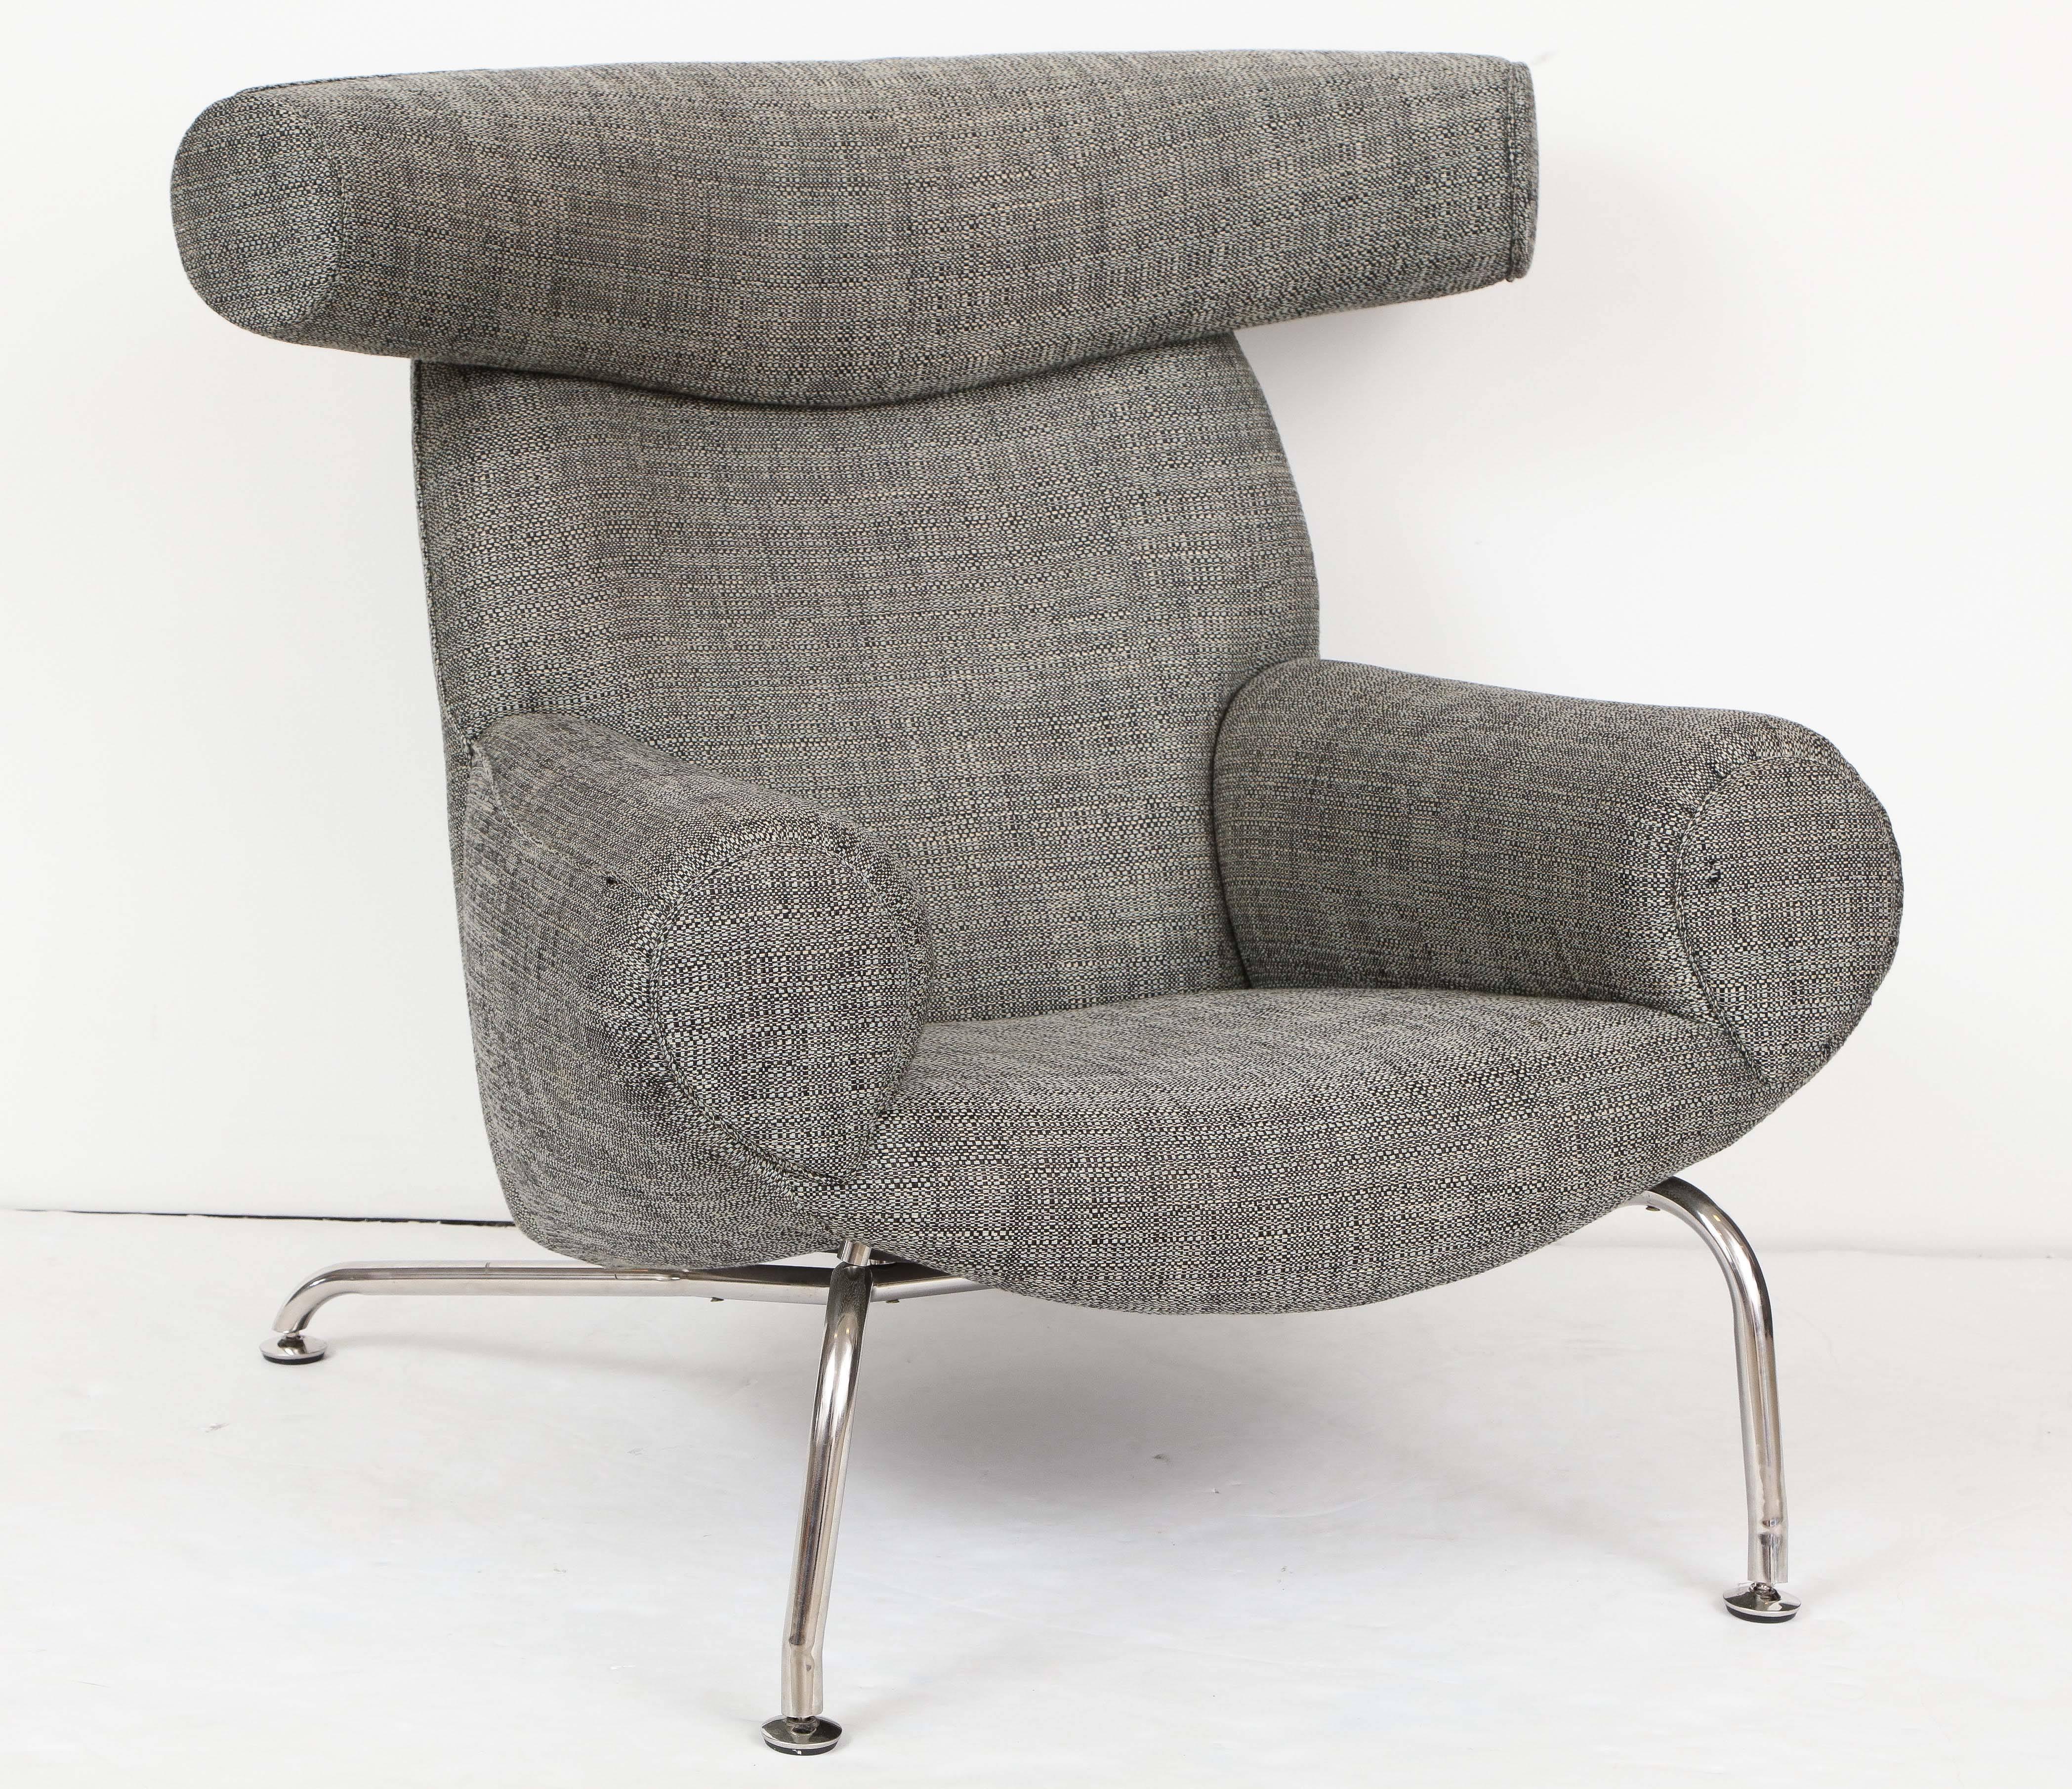 A contemporary re-issue of the Ox chair by Hans Wegner for Erik Jørgensen, Denmark, circa 1990.

Fabric upholstery with polished chrome base. Recovered in Romo 